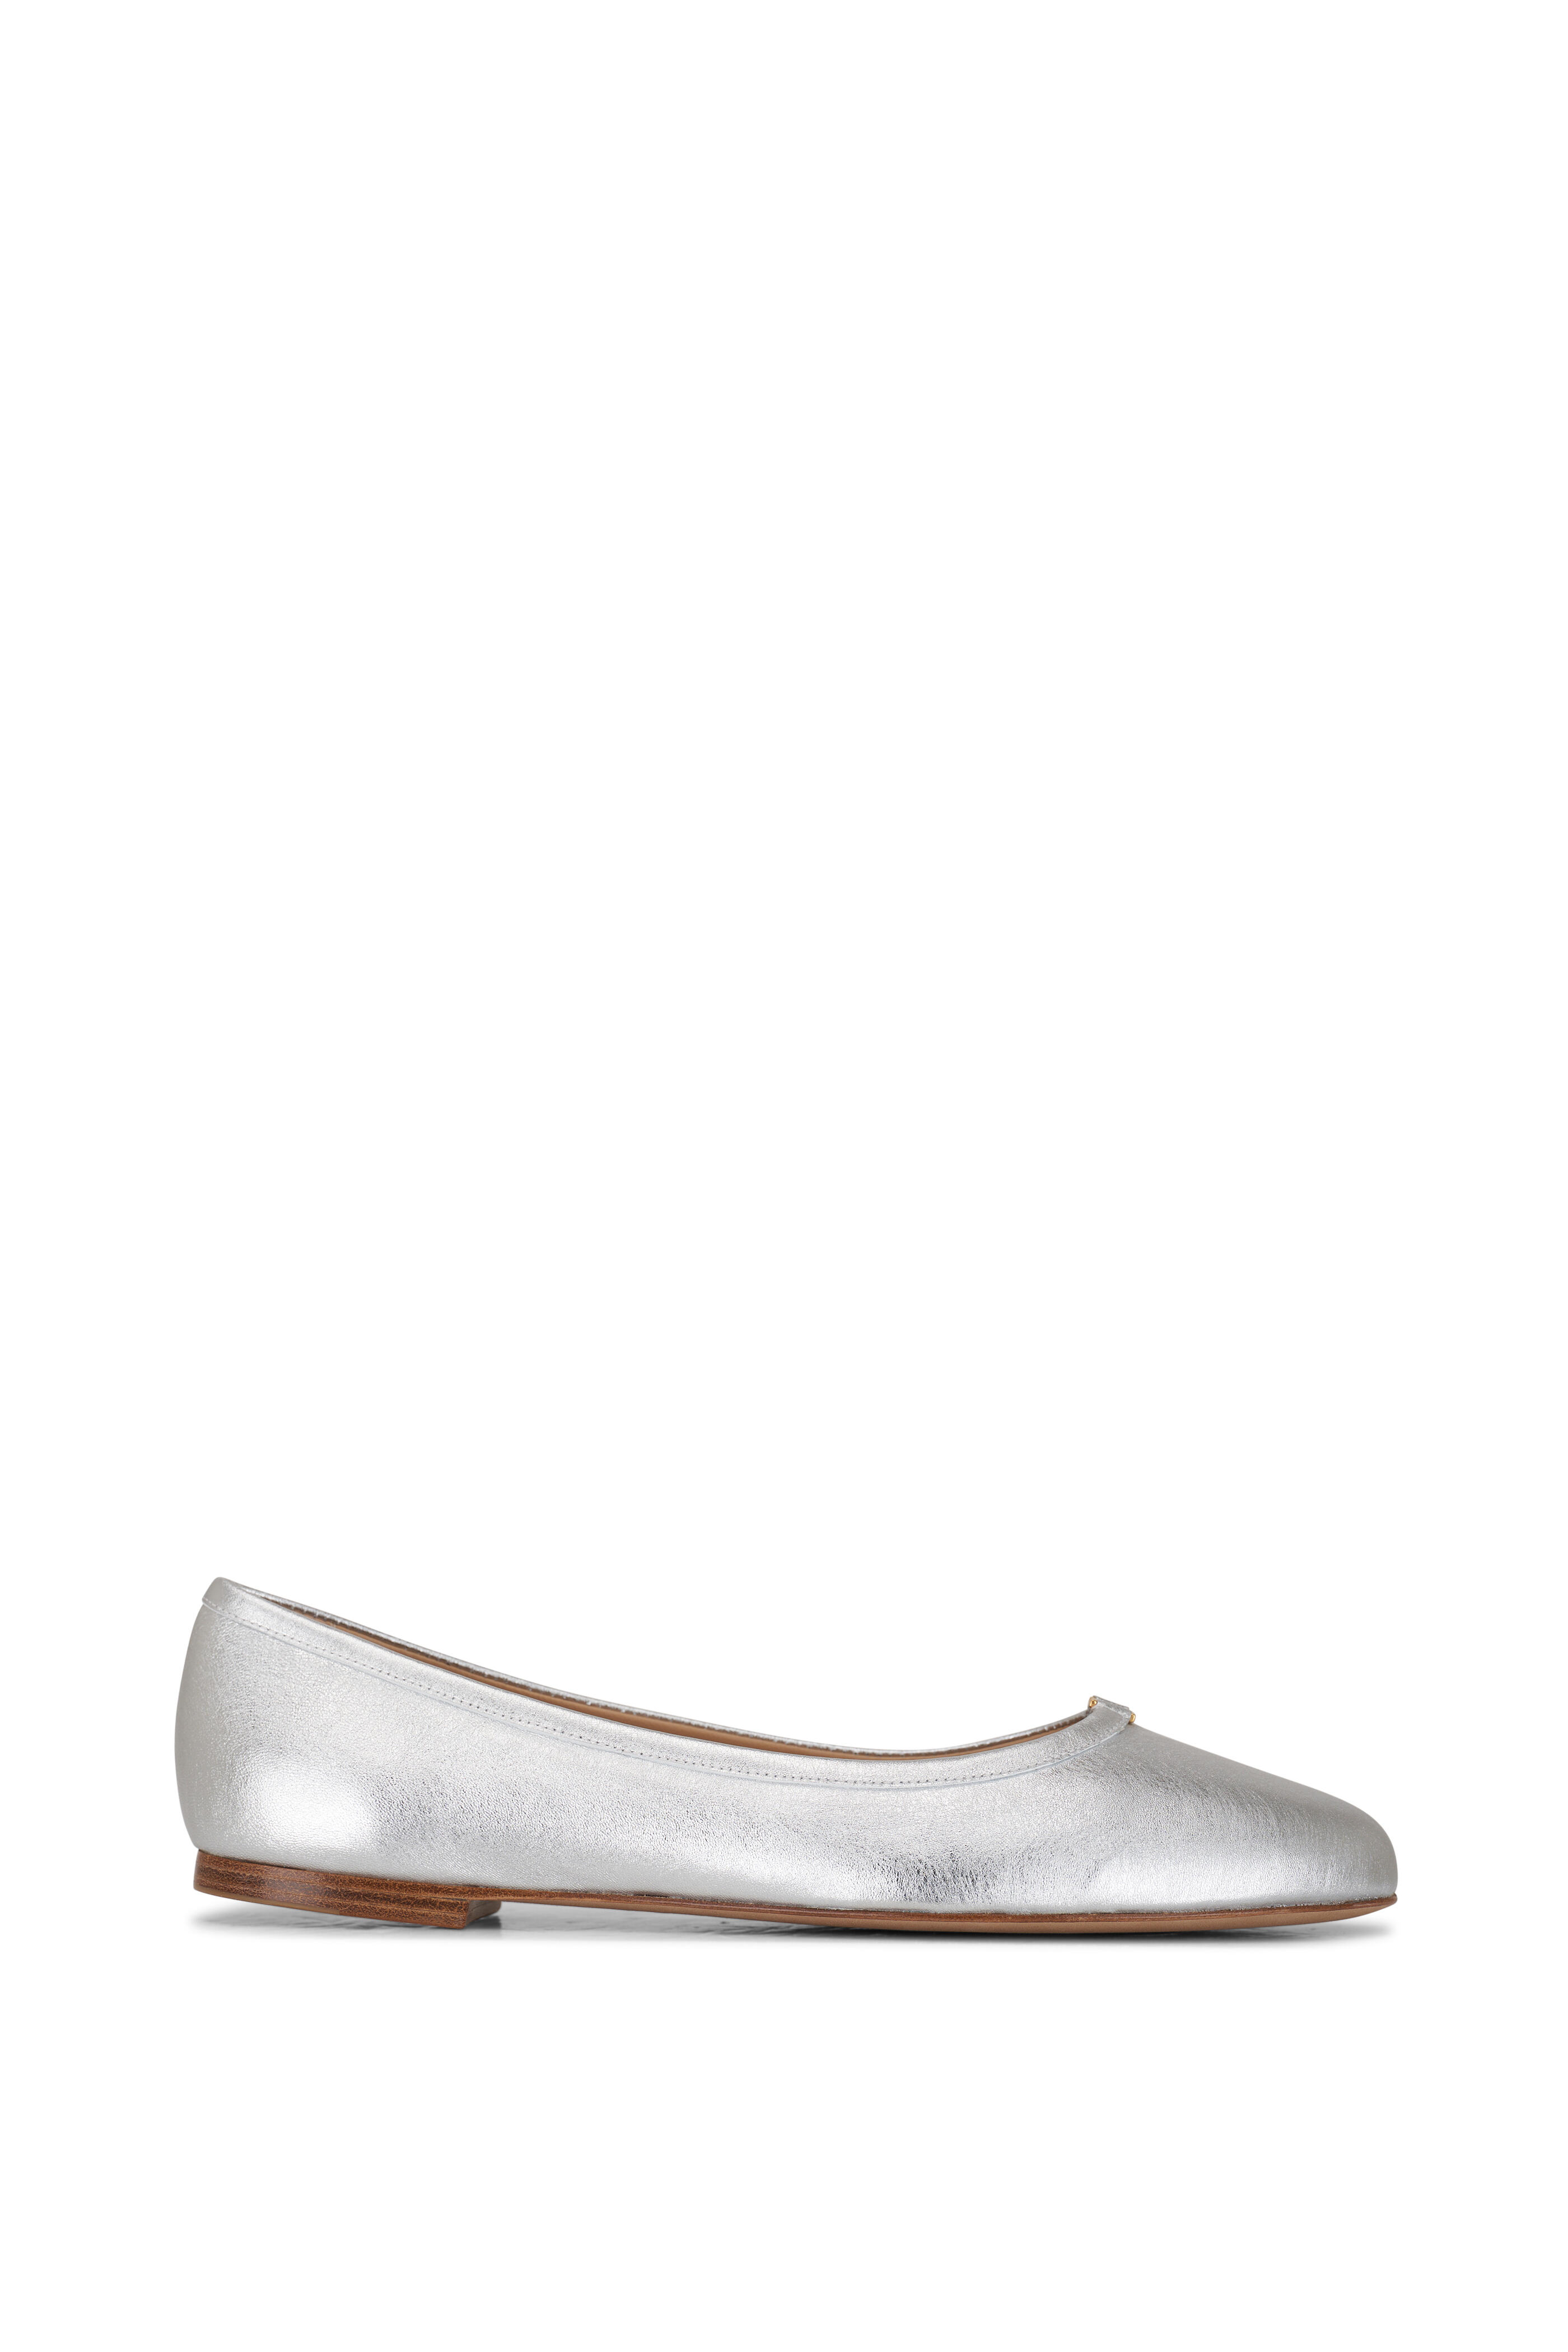 Chloé Kids buckled leather ballerina shoes - Silver